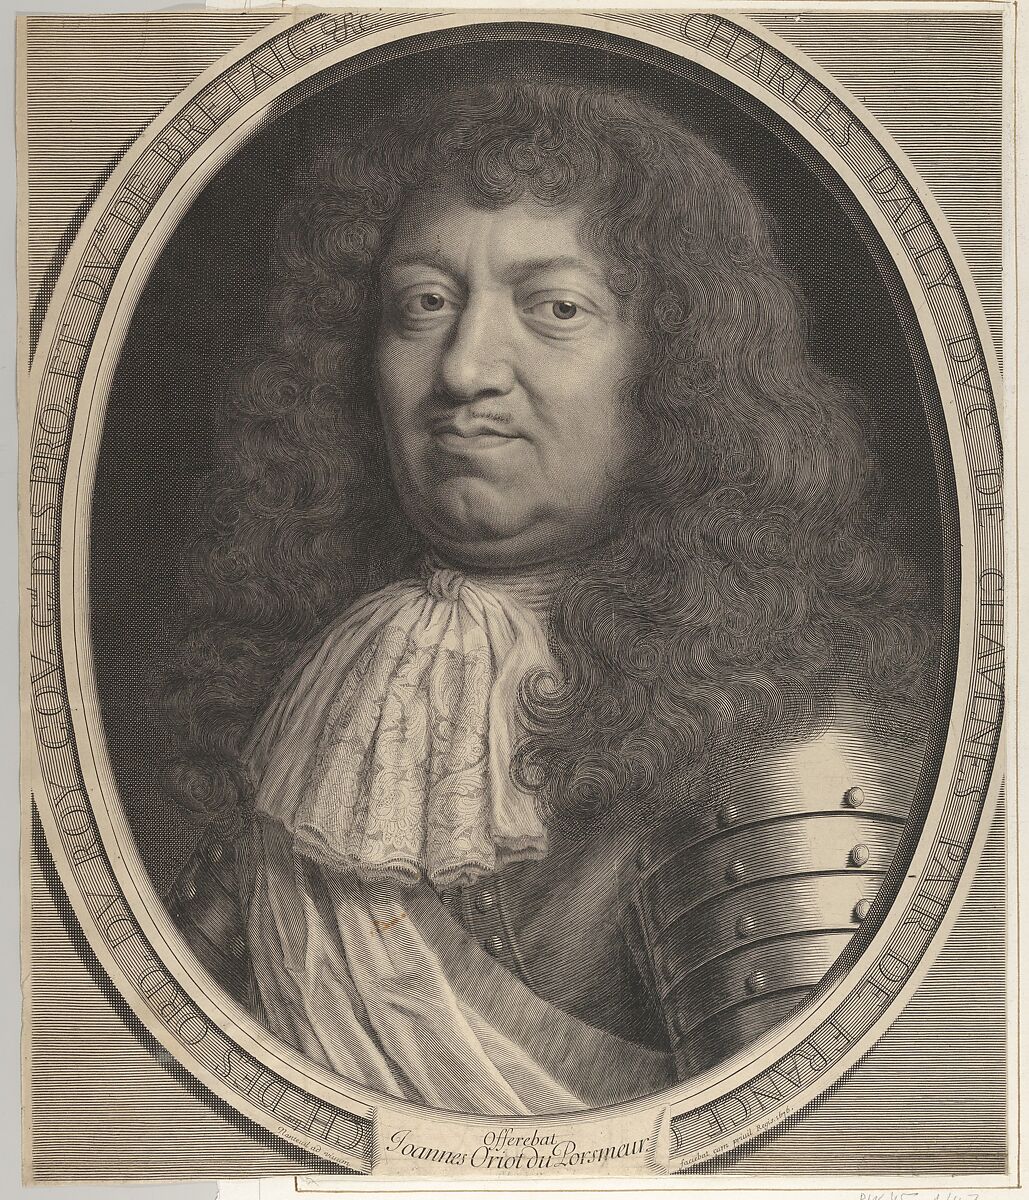 Charles d'Albert d'Ailly, duc de Chaulnes, Robert Nanteuil (French, Reims 1623–1678 Paris), Engravingl; first state of two (Petitjean & Wickert) 